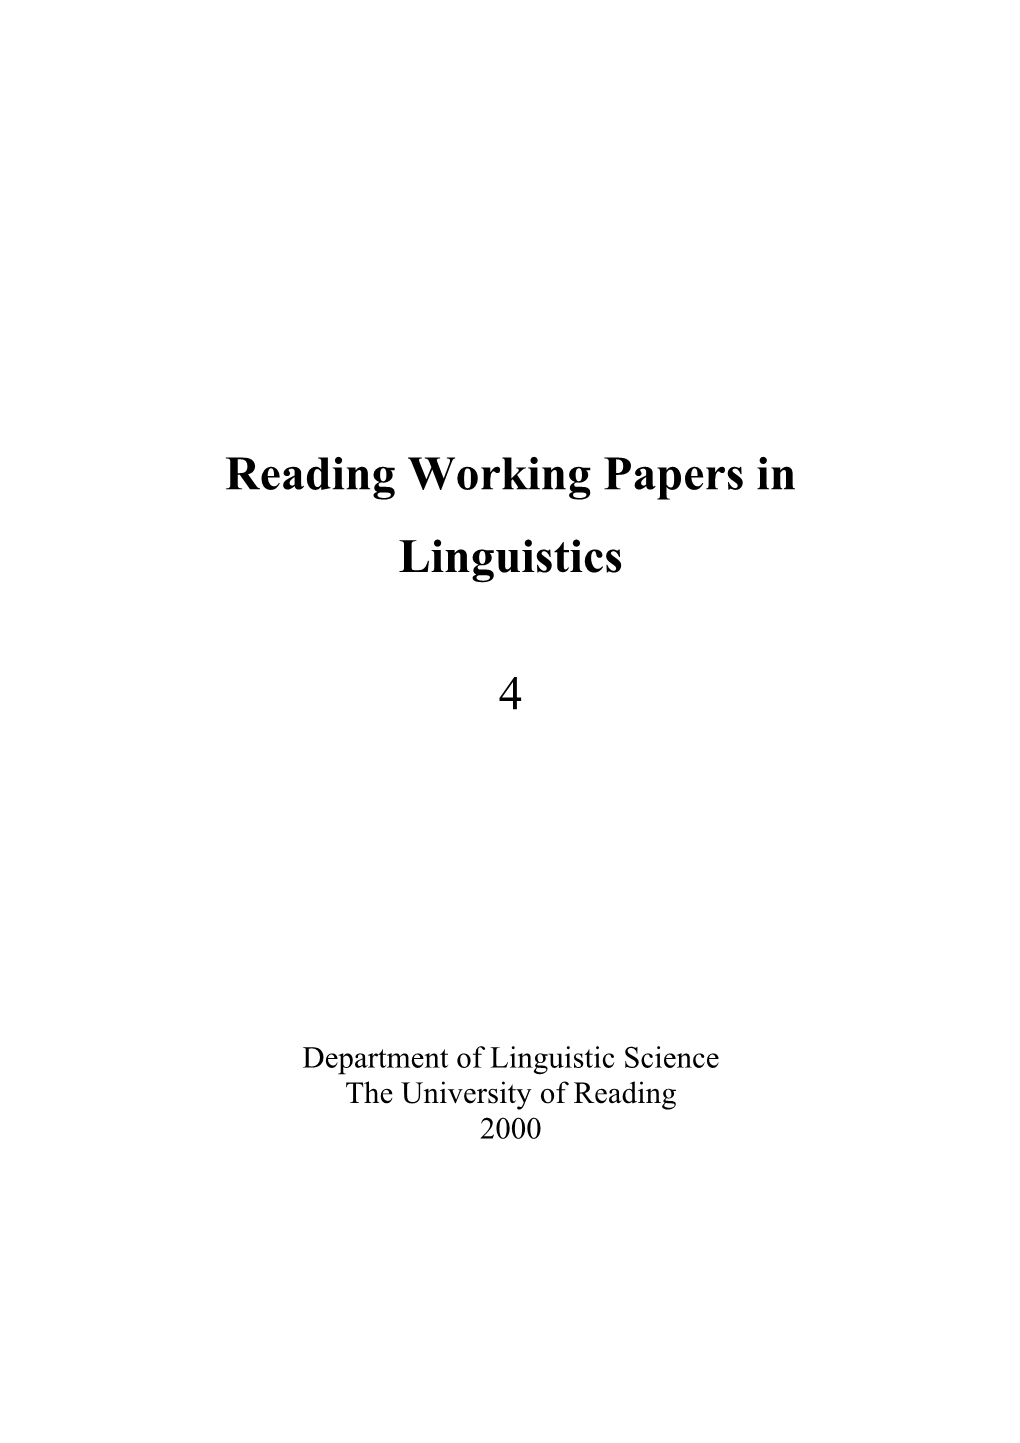 Working Papers 4, 2000